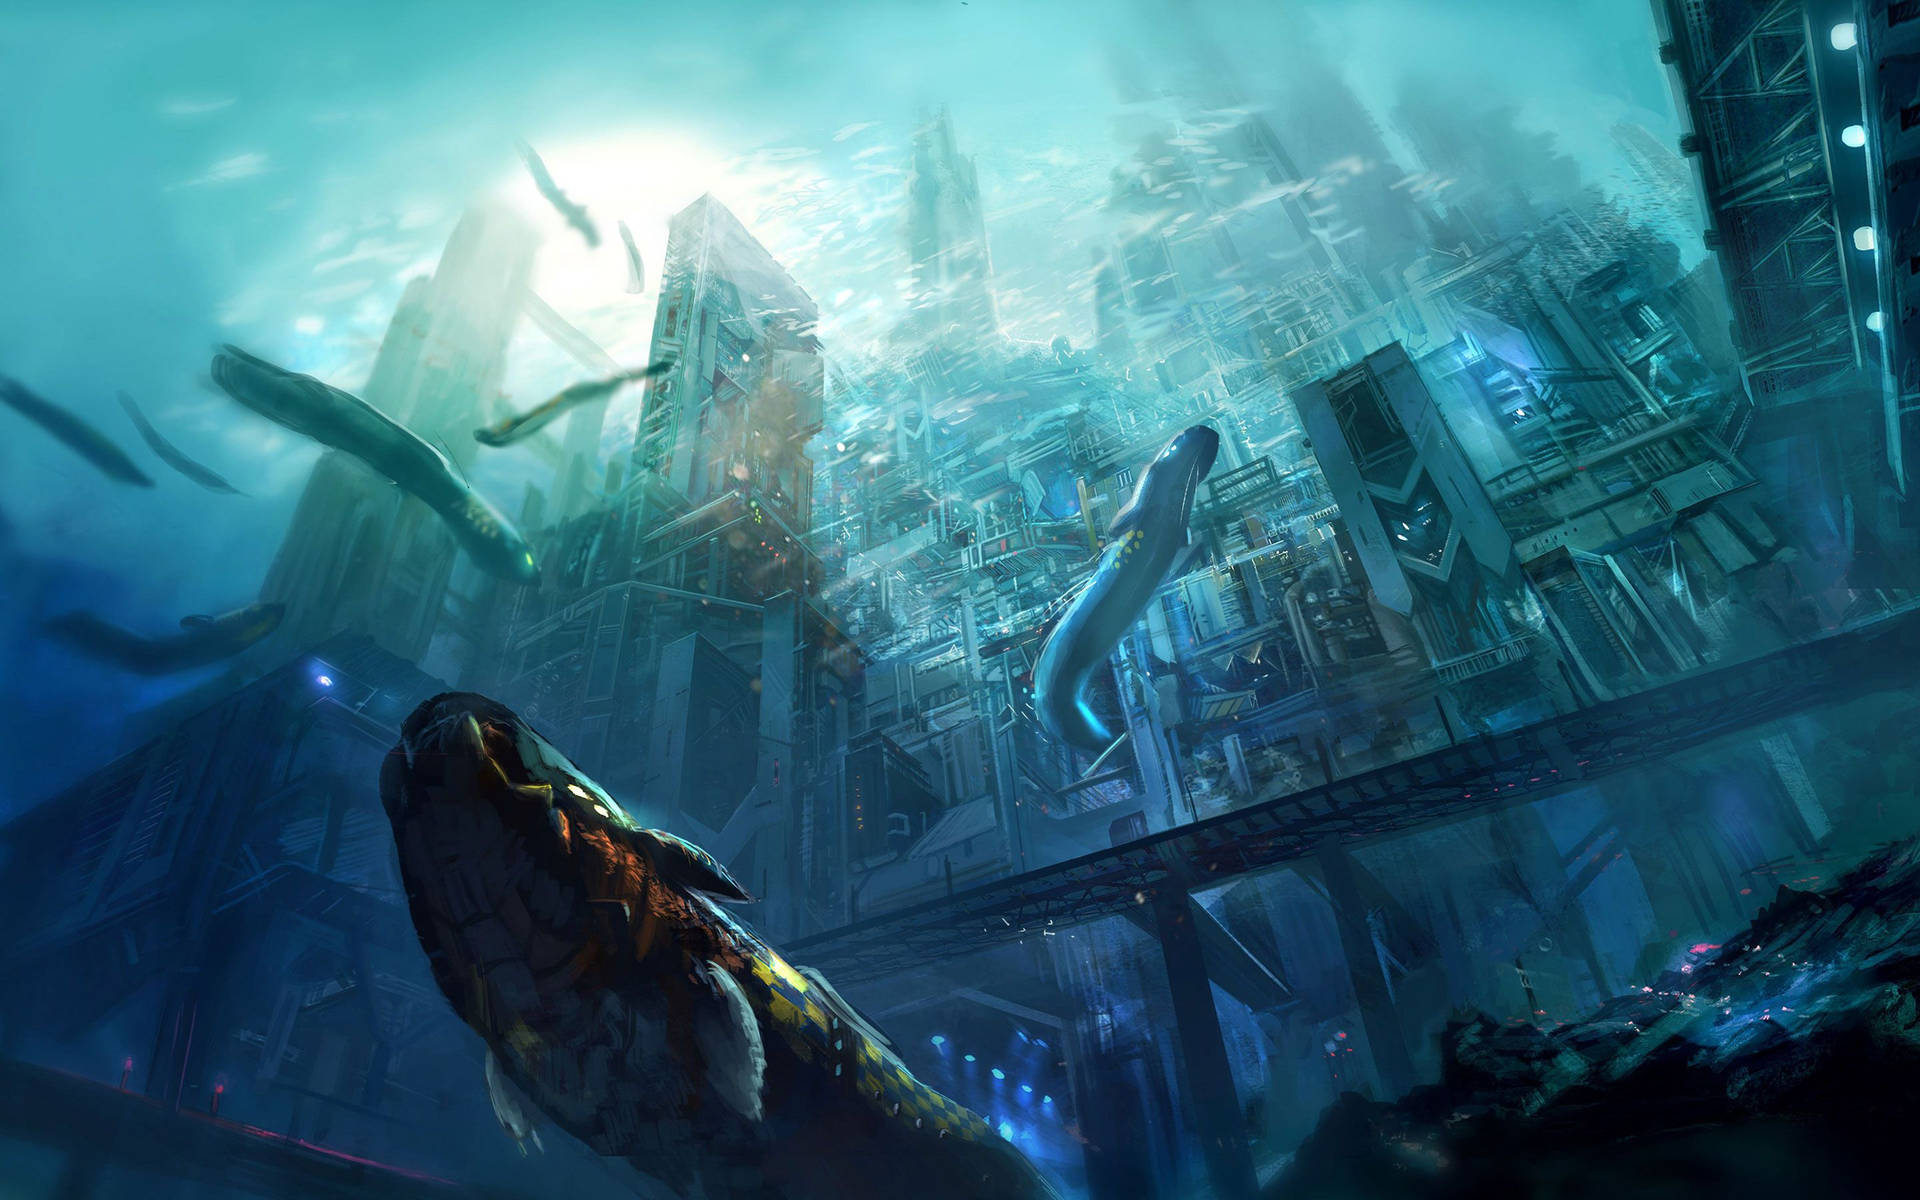 The depths of a mysterious underwater world Wallpaper